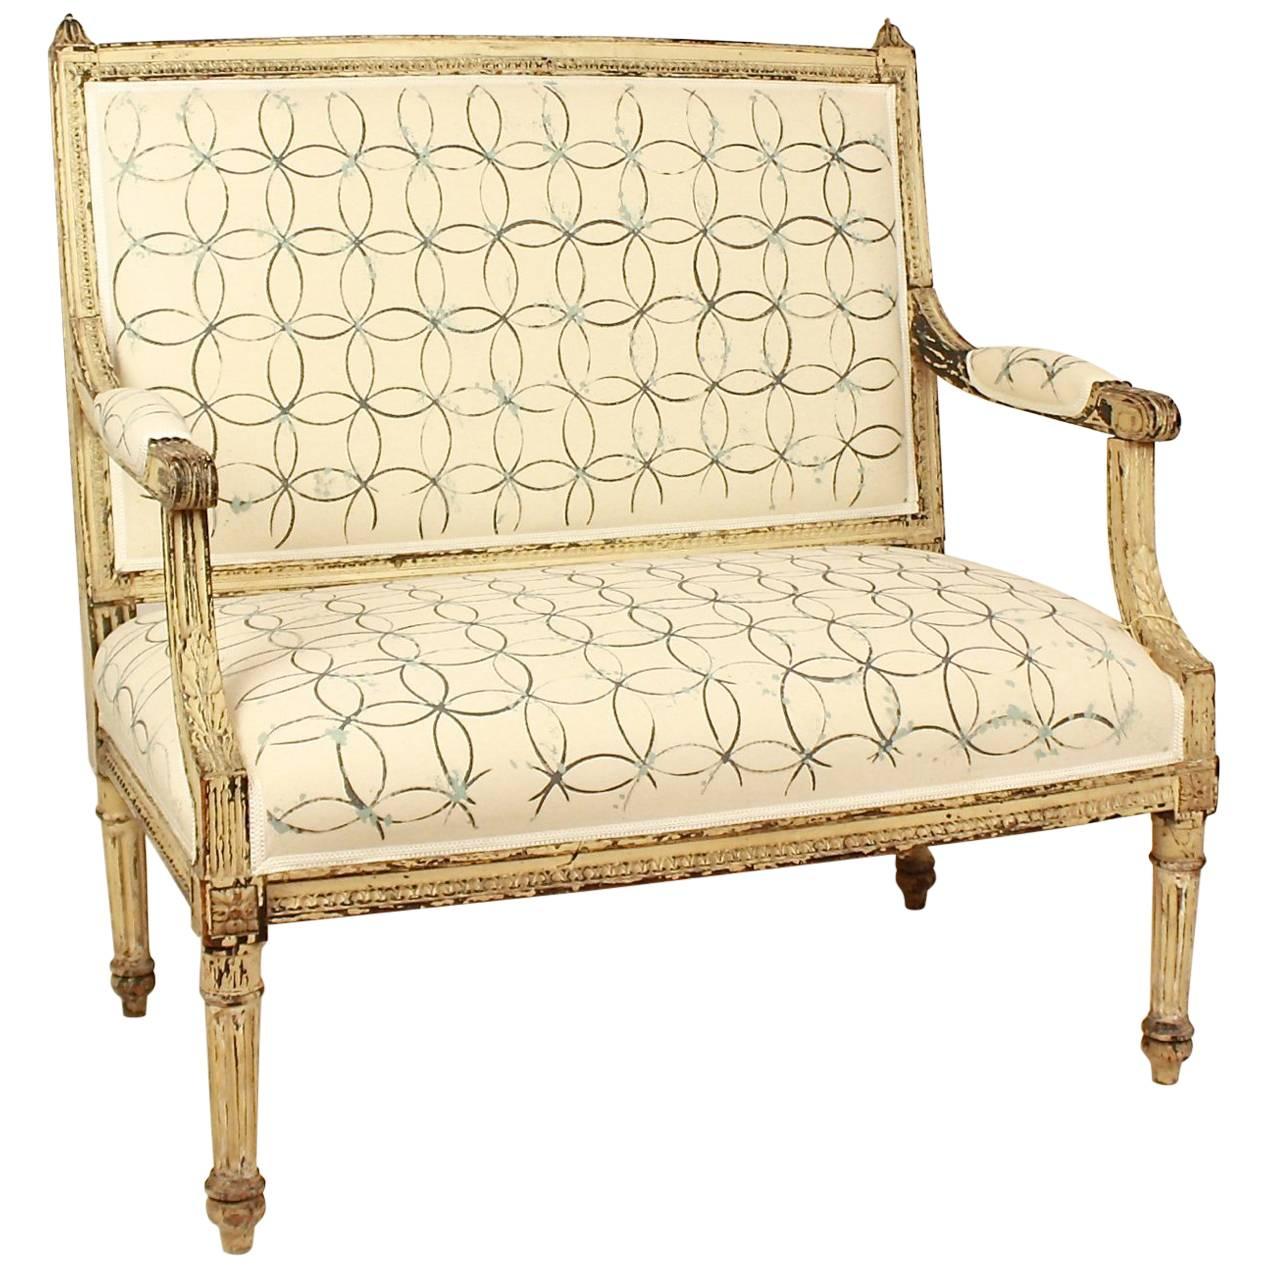 Louis XVI Painted Settee Upholstered with Hand-Painted Fabric